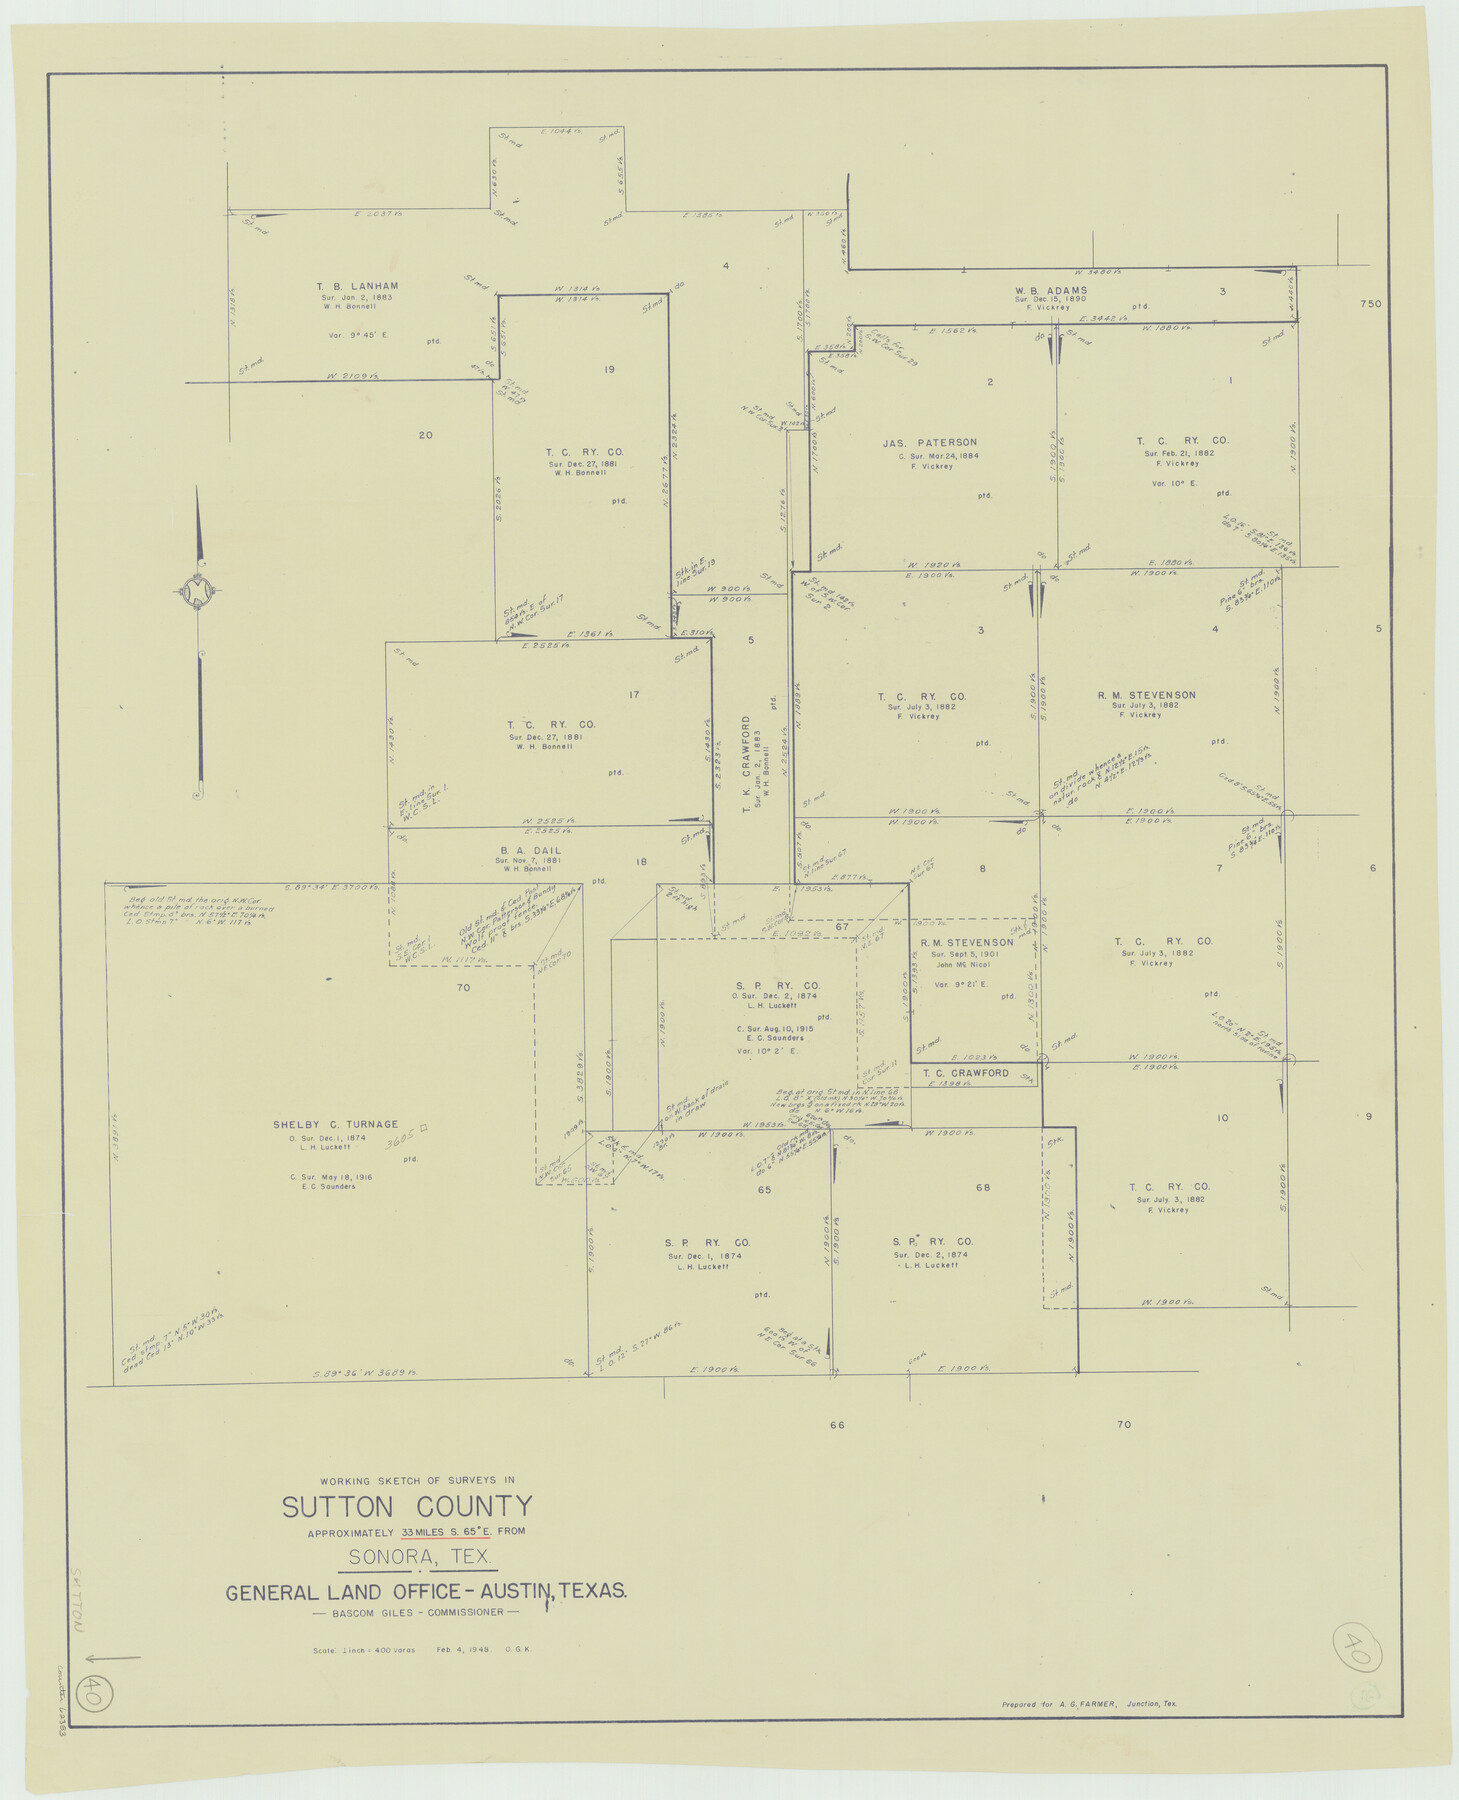 62383, Sutton County Working Sketch 40, General Map Collection